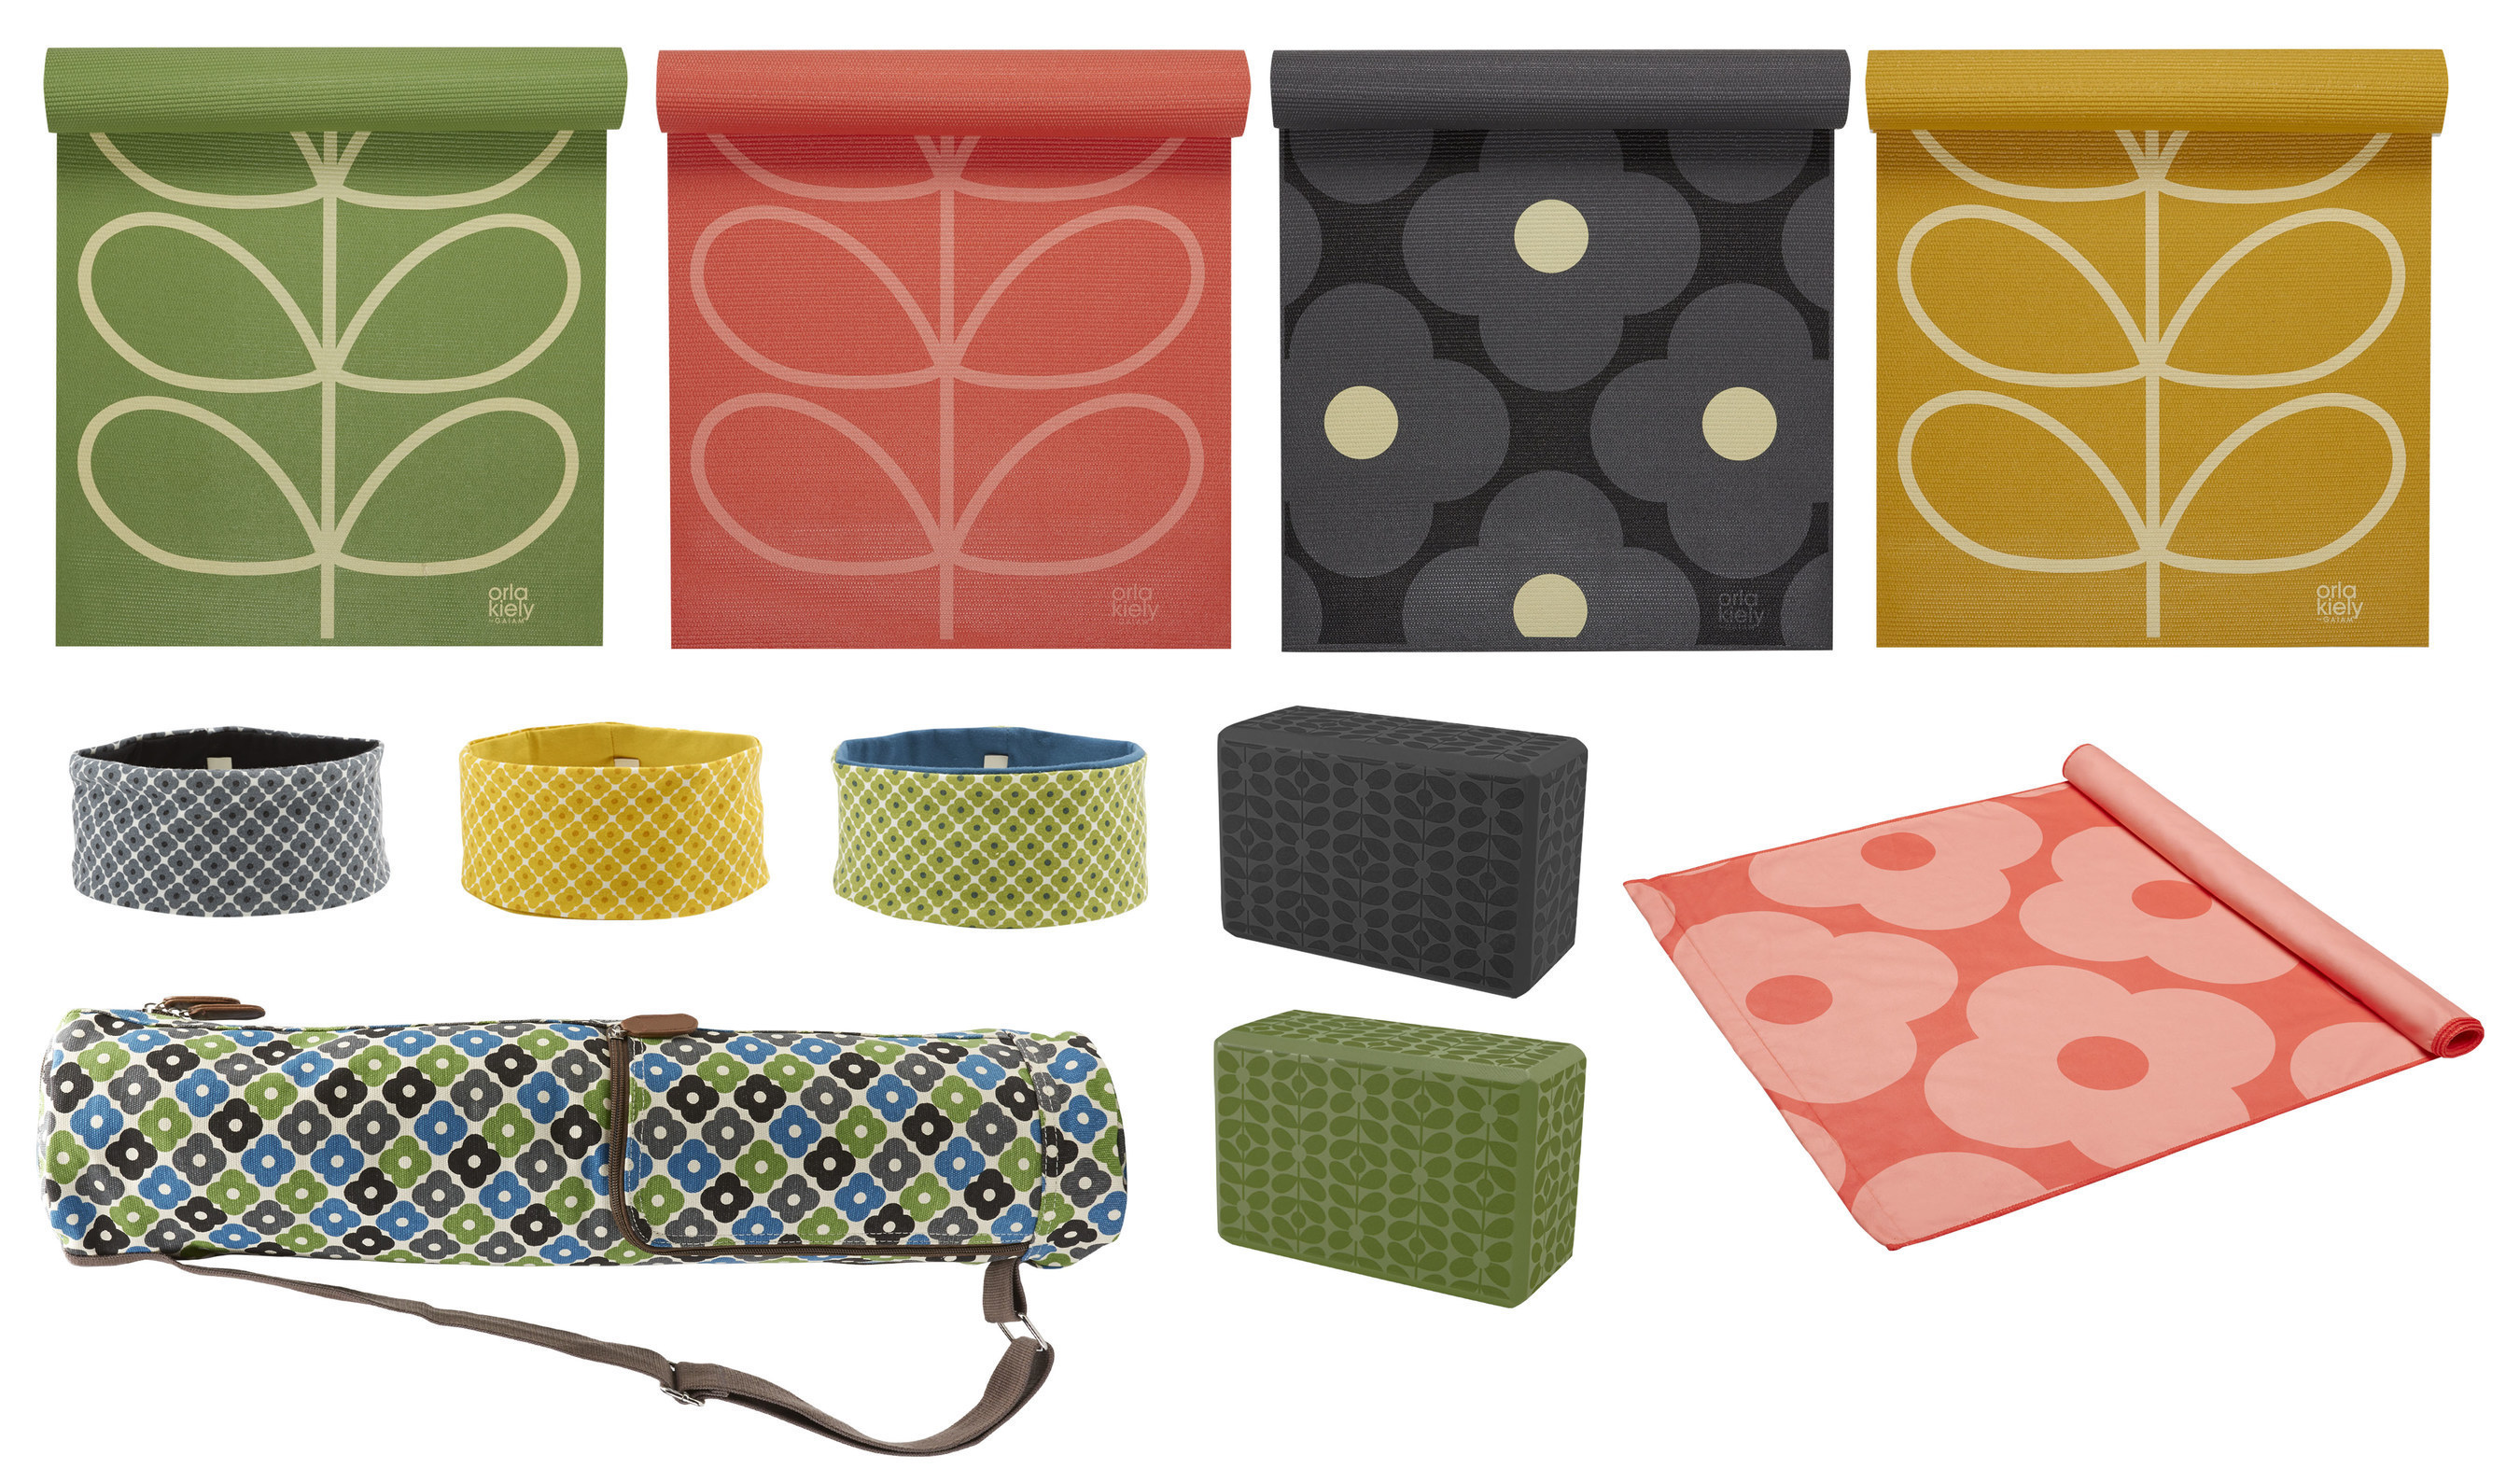 Gaiam Partners With Orla Kiely To Launch Limited Edition Yoga Mats And  Accessories